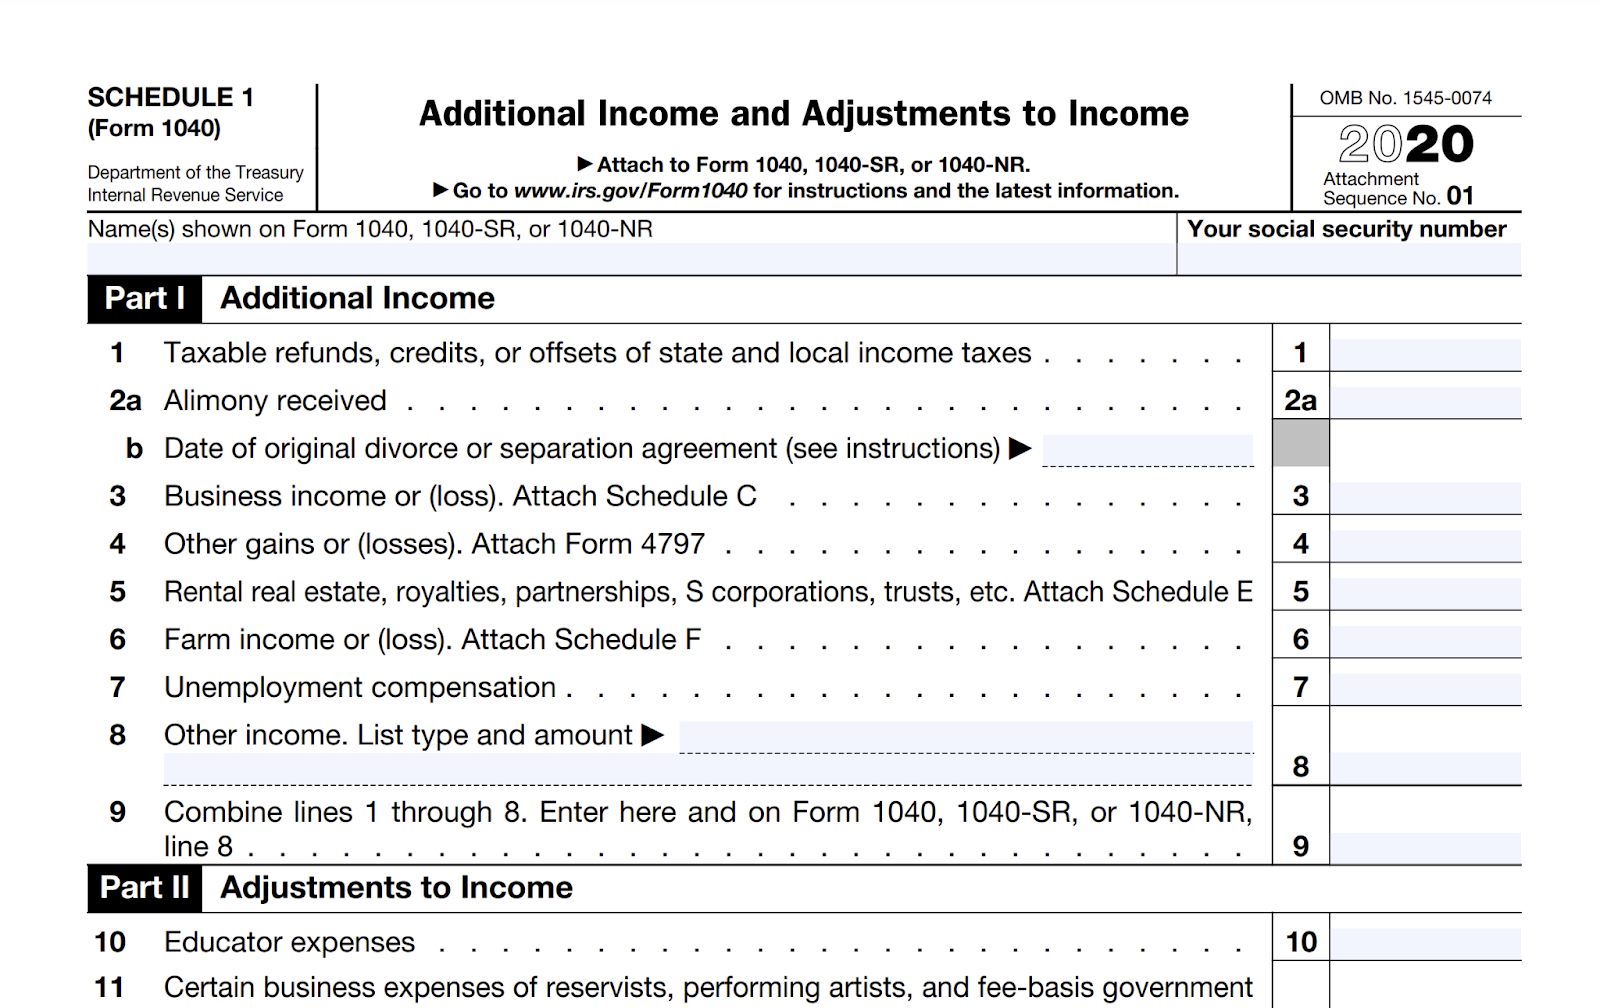 Screenshot of IRS Form 1040 Schedule 1 for Additional Income and Adjustments to Income